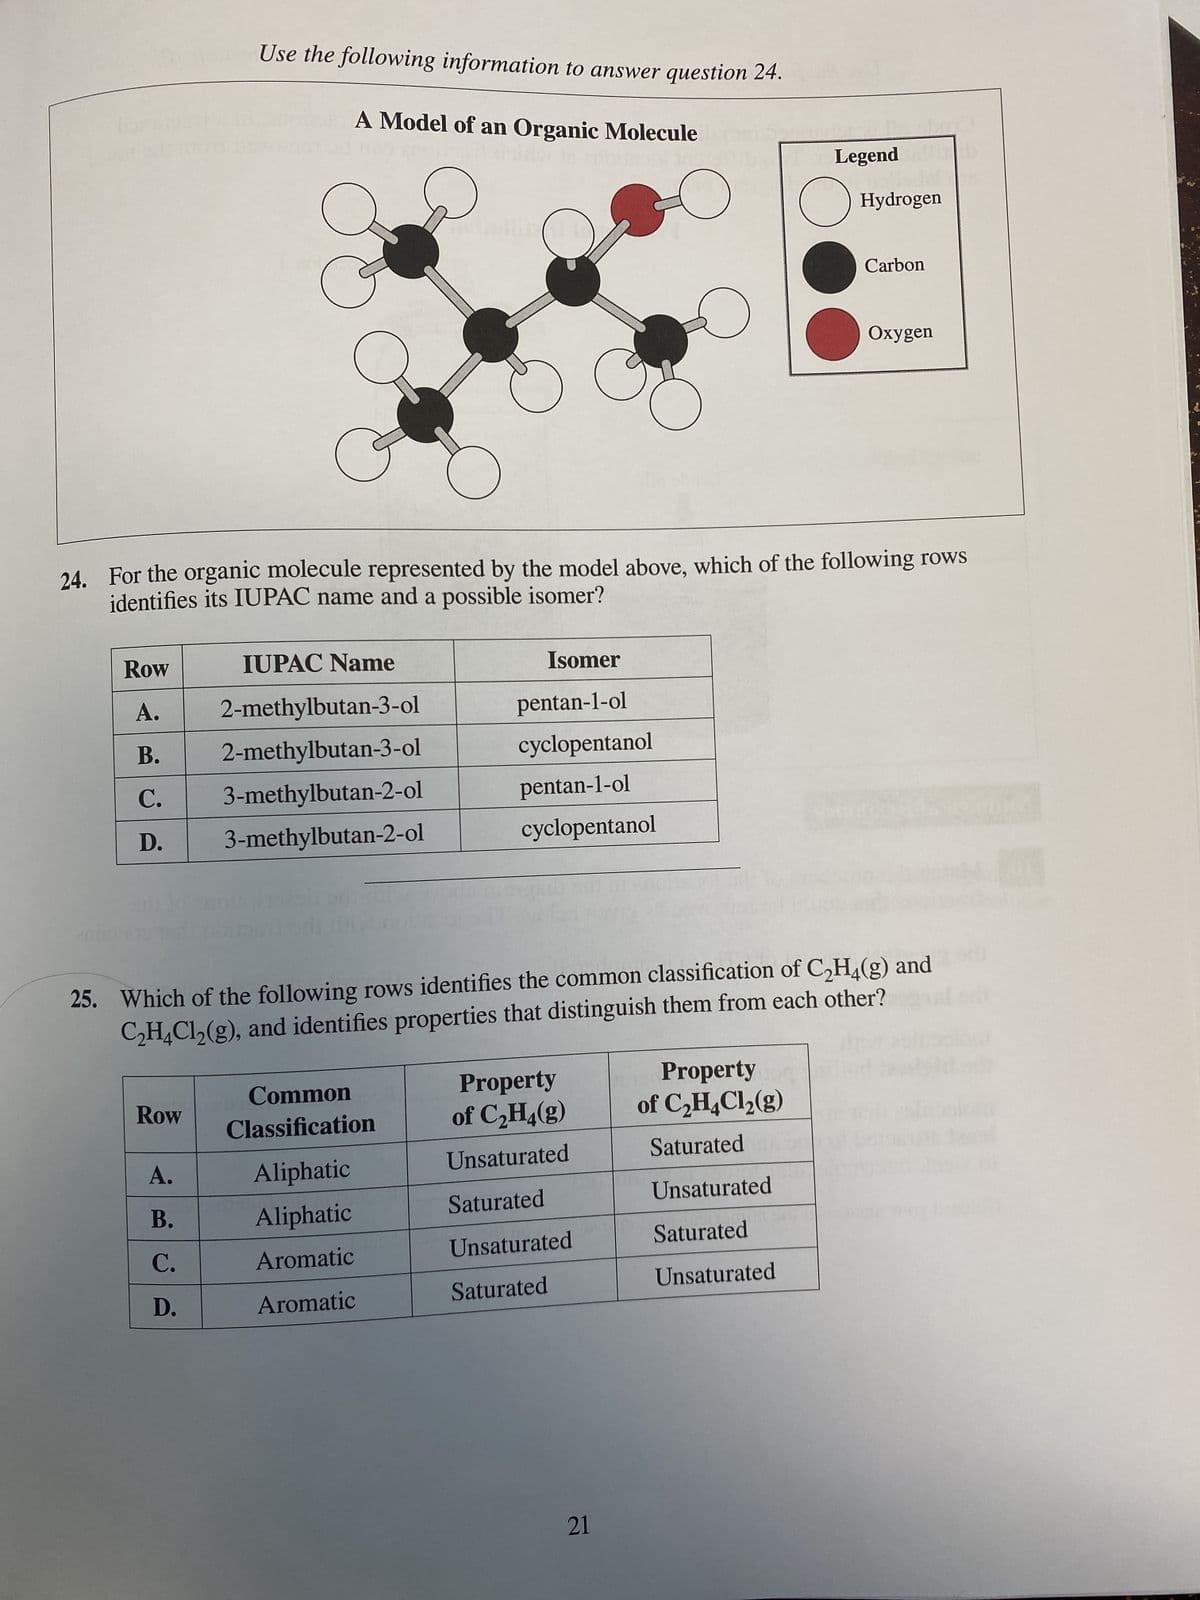 Row
A.
B.
C.
D.
Use the following information to answer question 24.
A Model of an Organic Molecule
in te zaitool in
Row
A.
B.
C.
D.
IUPAC Name
C
24. For the organic molecule represented by the model above, which of the following rows
identifies its IUPAC name and a possible isomer?
2-methylbutan-3-ol
2-methylbutan-3-ol
3-methylbutan-2-ol
3-methylbutan-2-ol
hotellita
Common
Classification
Aliphatic
Aliphatic
Aromatic
Aromatic
Isomer
pentan-1-ol
cyclopentanol
pentan-1-ol
cyclopentanol
25. Which of the following rows identifies the common classification of C₂H4(g) and
C₂H4Cl₂(g), and identifies properties that distinguish them from each other?
Property
of C₂H₂(g)
Unsaturated
Saturated
Unsaturated
Saturated
21
Legend
Property dogs
Hydrogen
of C₂H4Cl₂(g)
Saturated
Unsaturated
Saturated
Unsaturated
Carbon
Oxygen